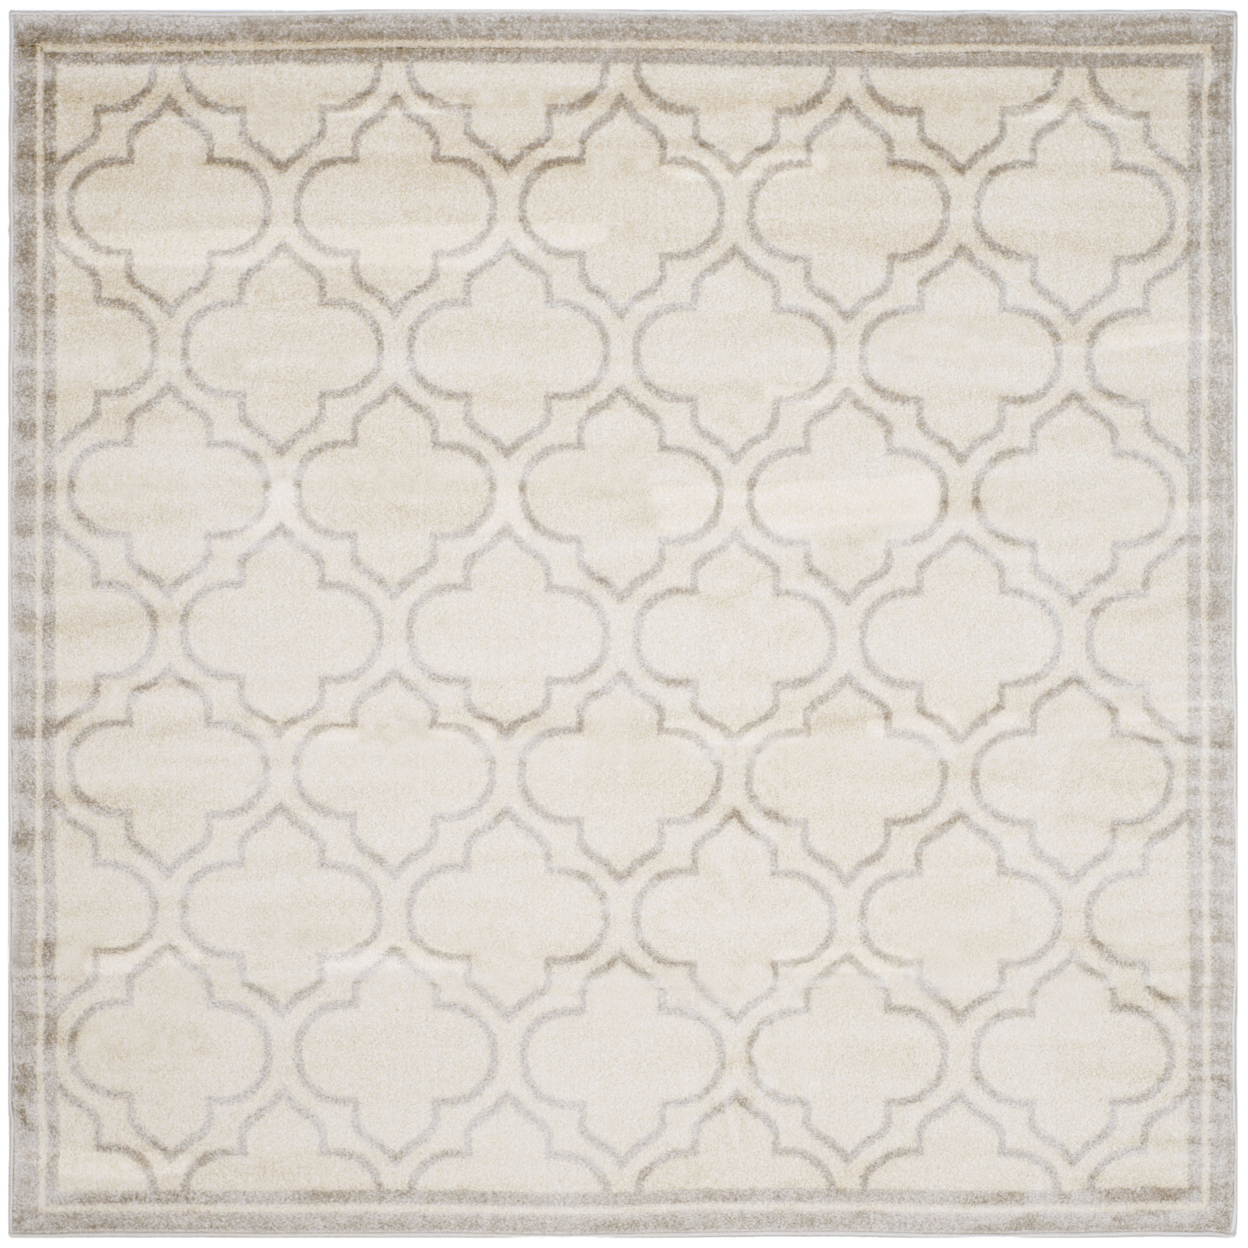 SAFAVIEH Amherst Collection AMT412E Ivory/Light Grey Rug - 7' Square